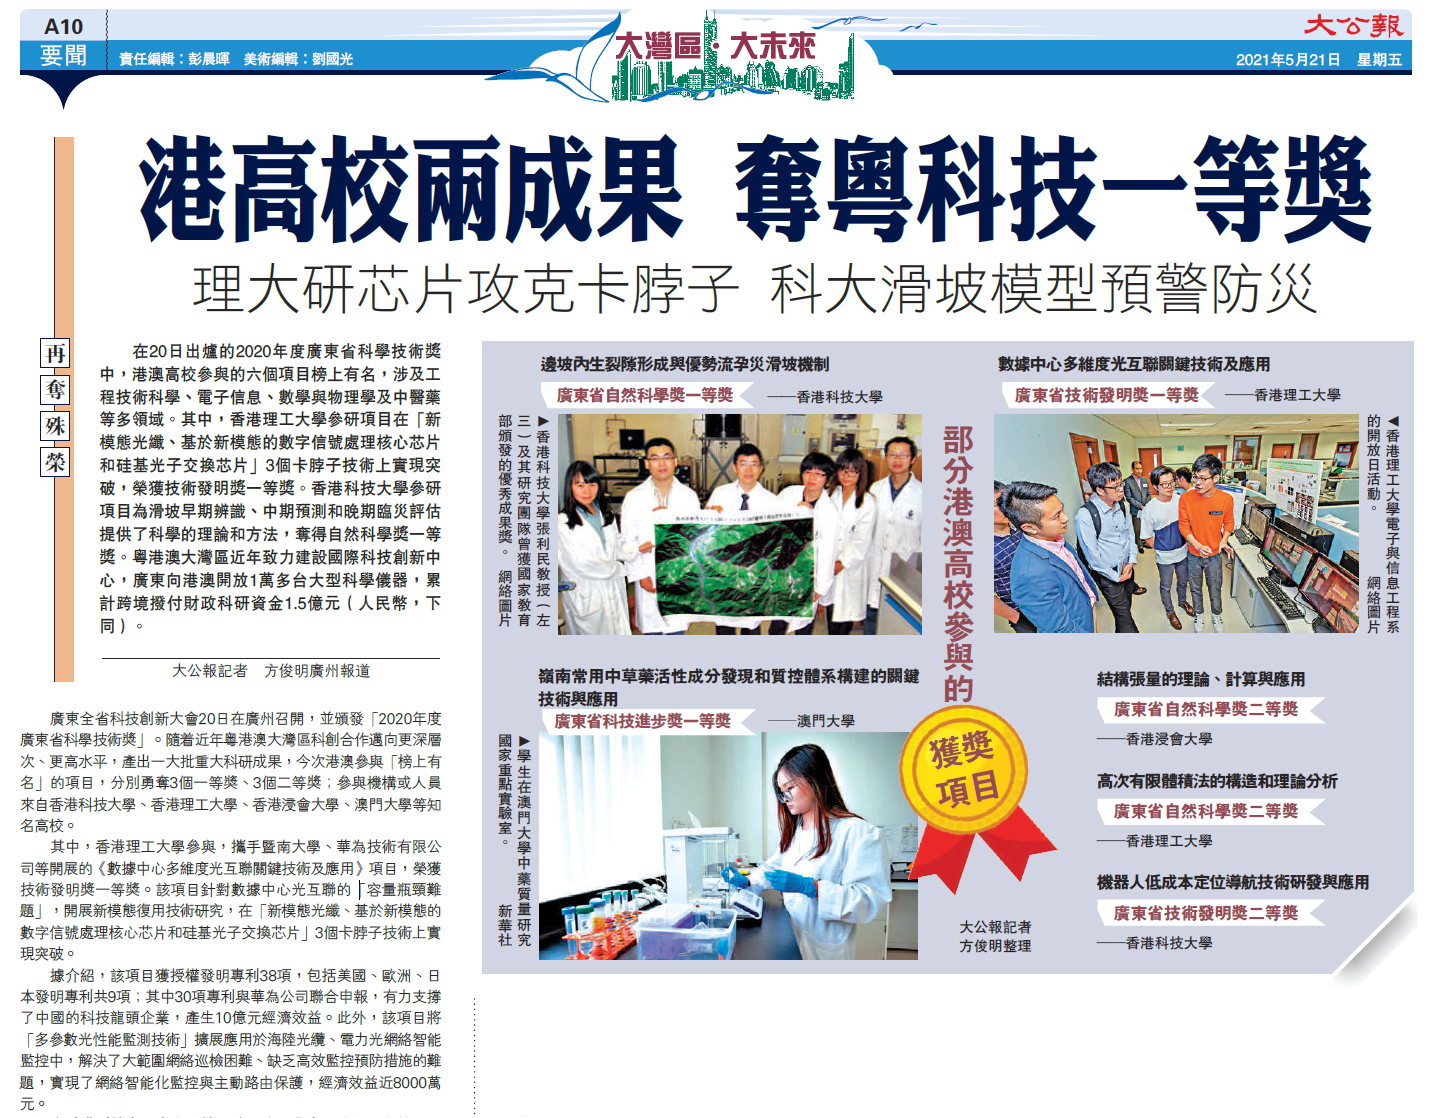 ra-Technological_Invention_Award_in_the_Guangdong_Province_Science_and_Technology_Award_2020